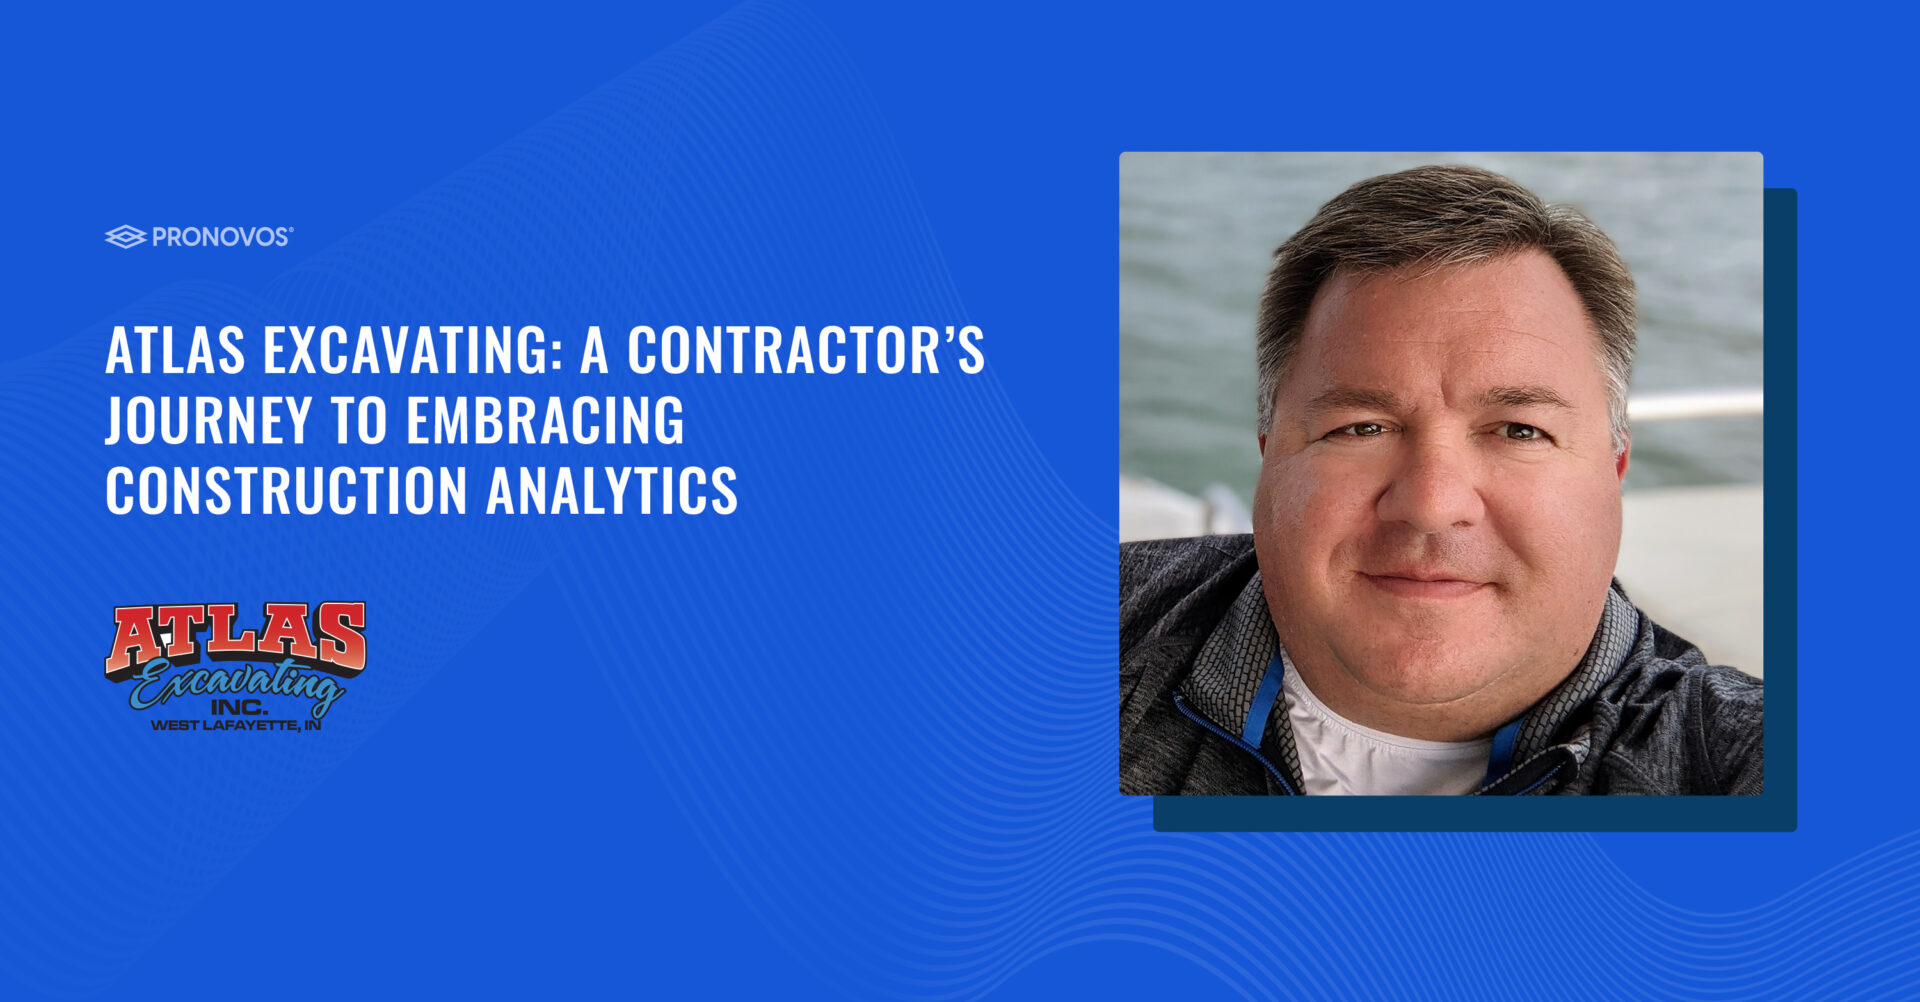 Atlas Excavating: A Contractor’s Journey to Embracing Construction Analytics